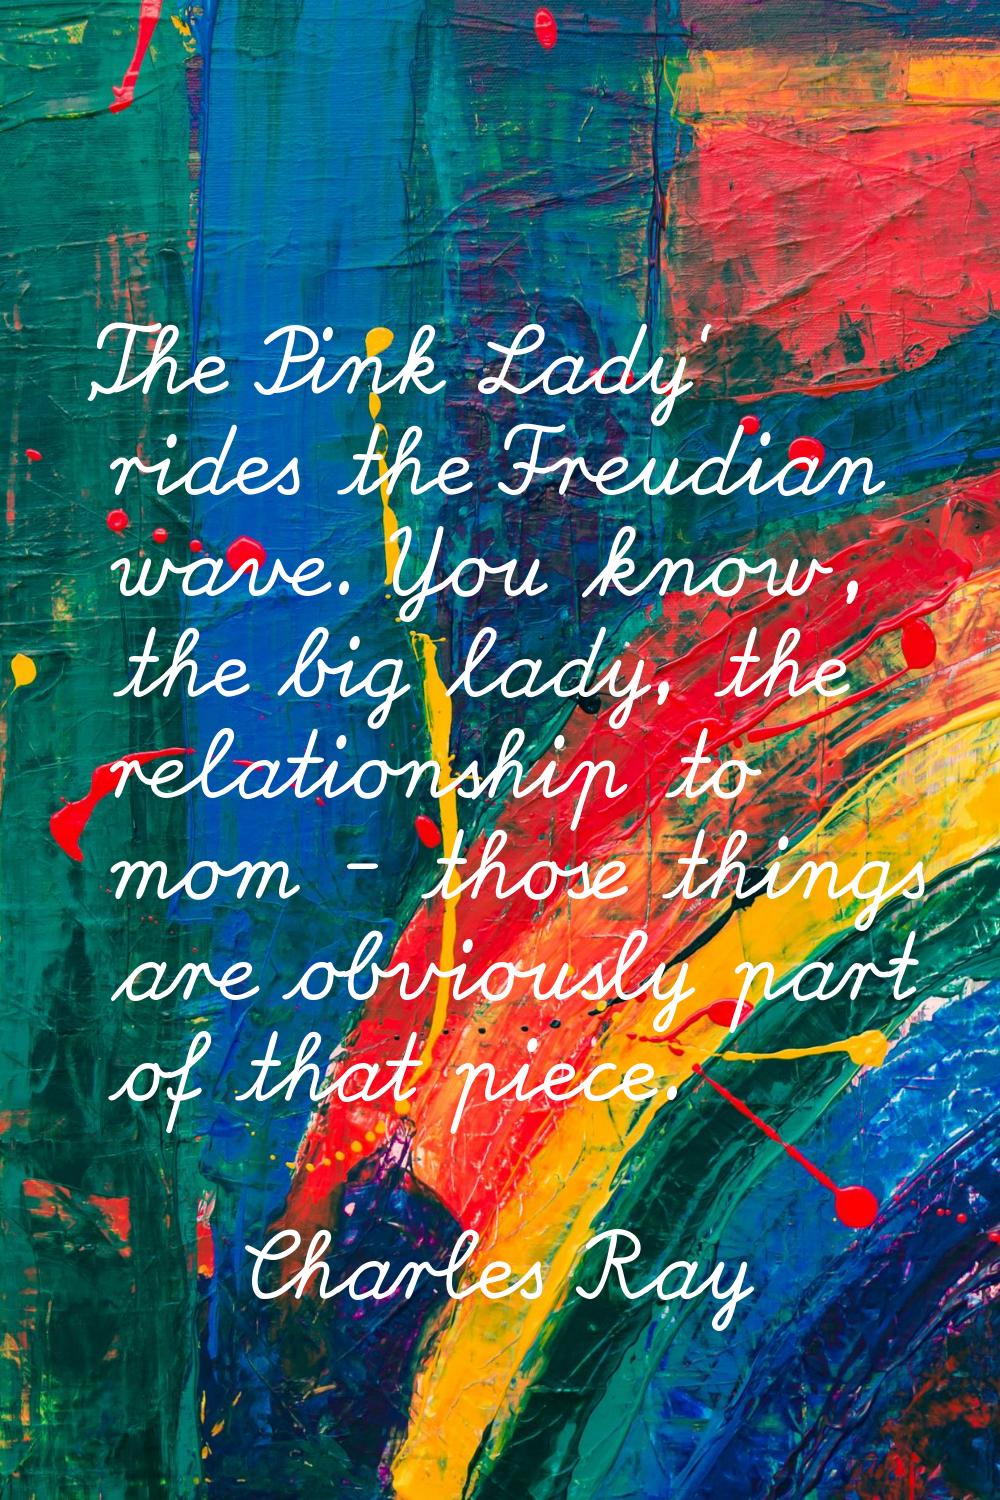 'The Pink Lady' rides the Freudian wave. You know, the big lady, the relationship to mom - those th